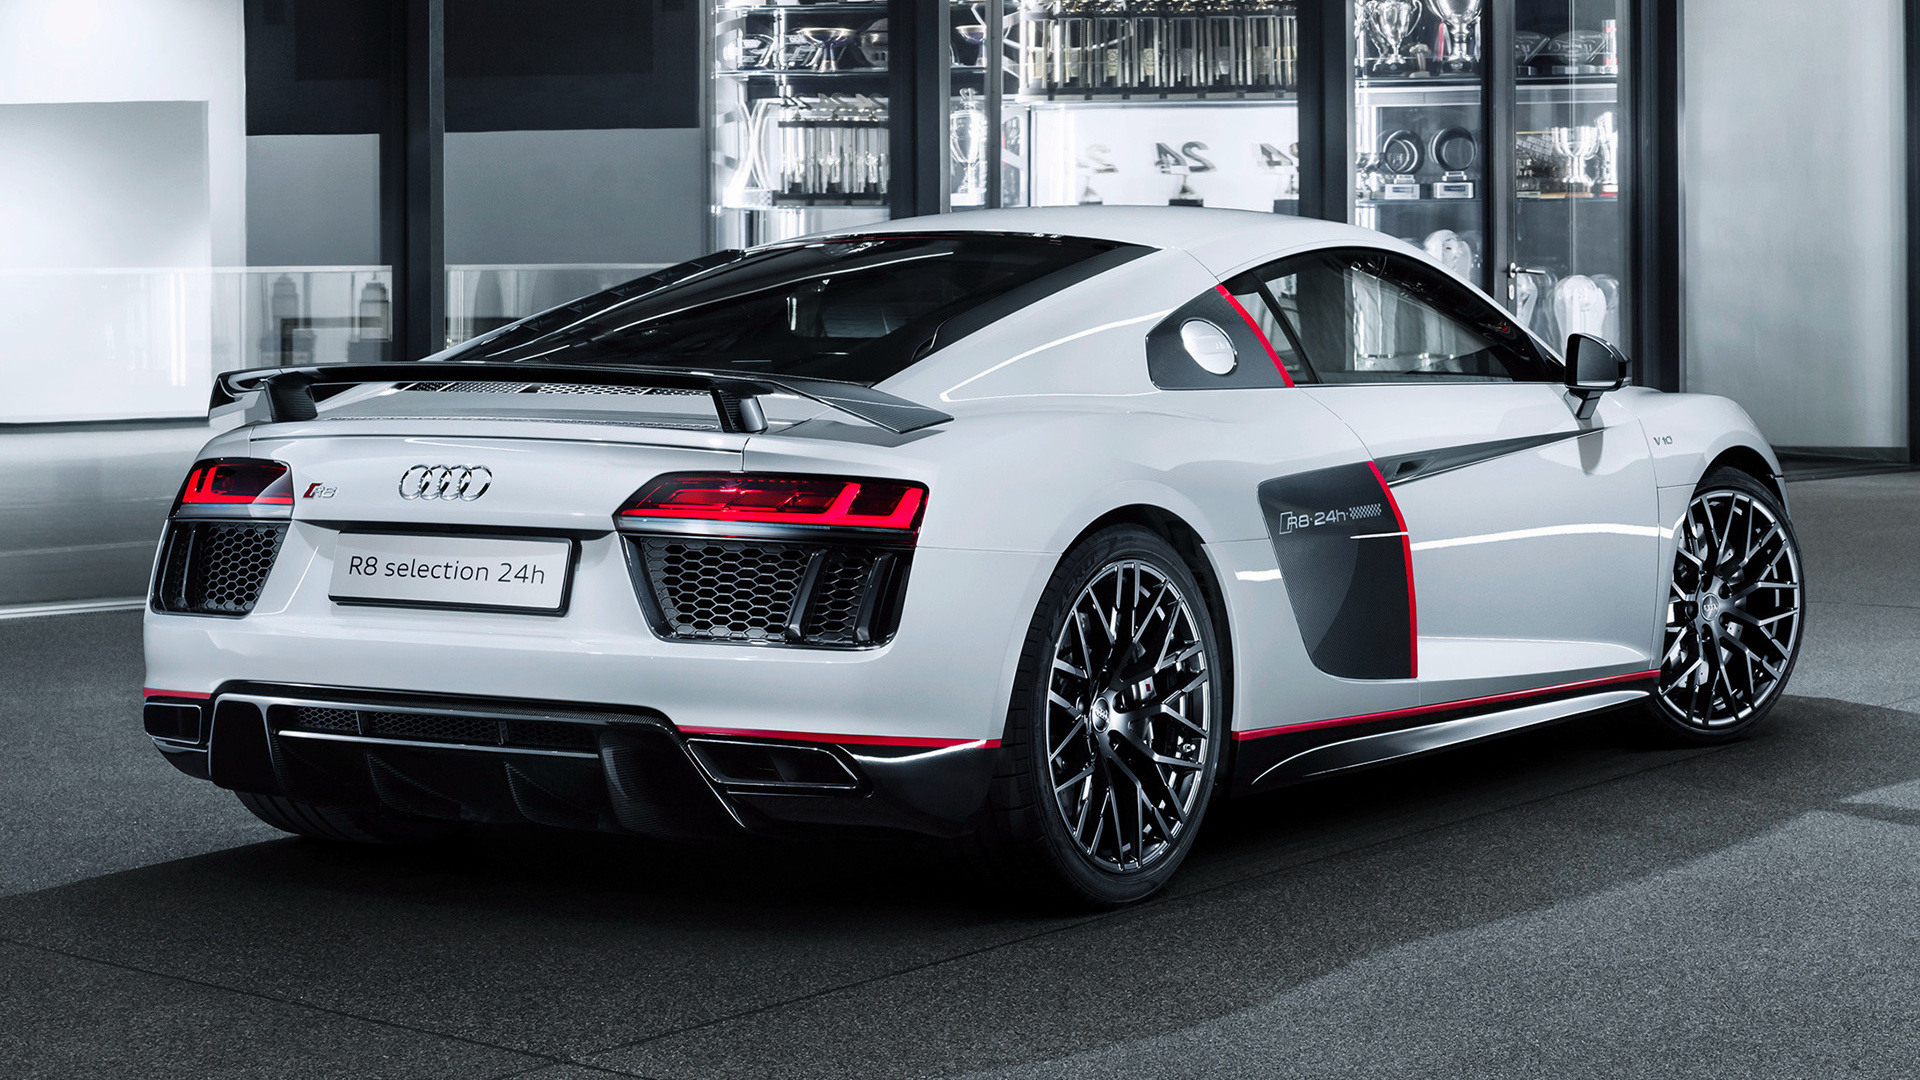 2016 Audi R8 V10 plus Photos, Specs and Review - RS